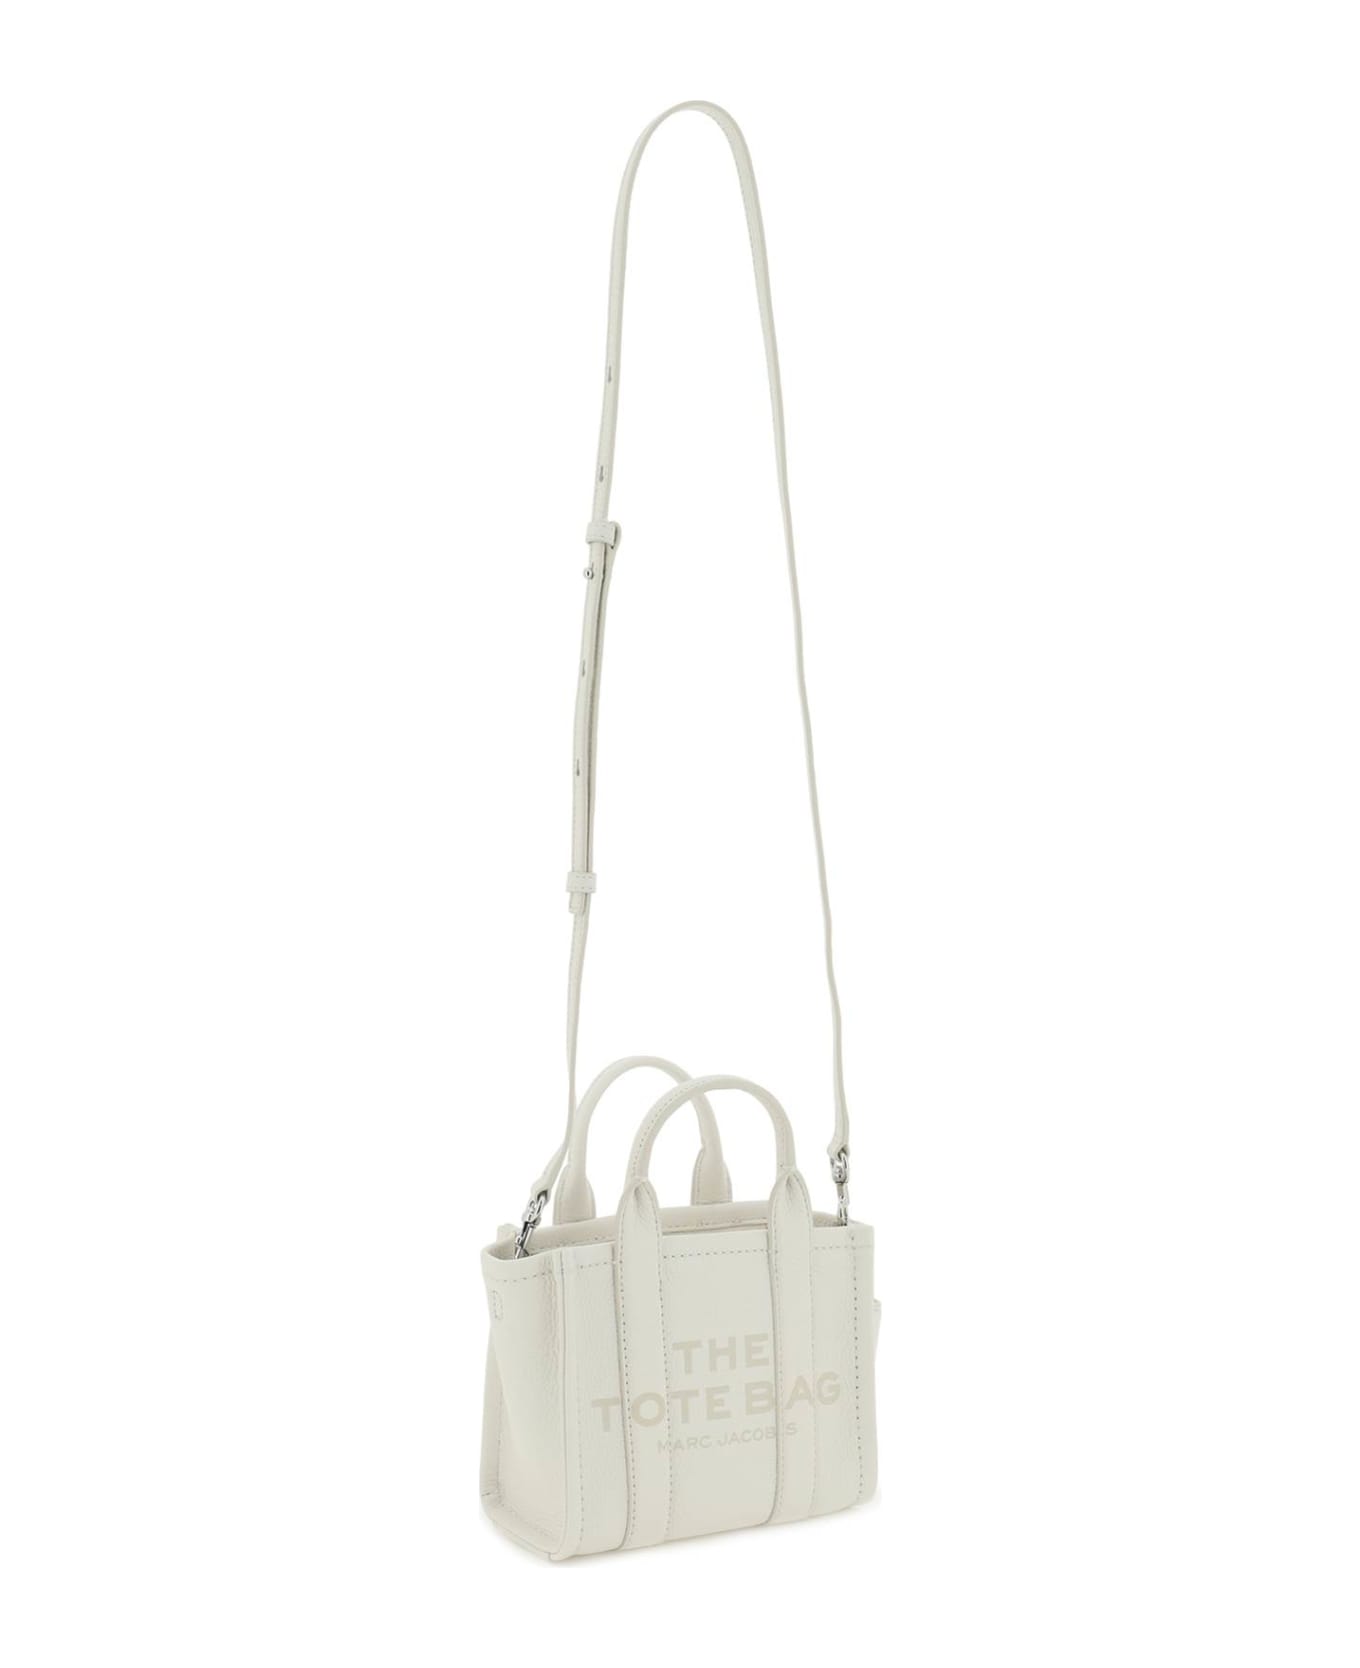 Marc Jacobs The Mini Tote Bag - COTTON SILVER (White) トートバッグ